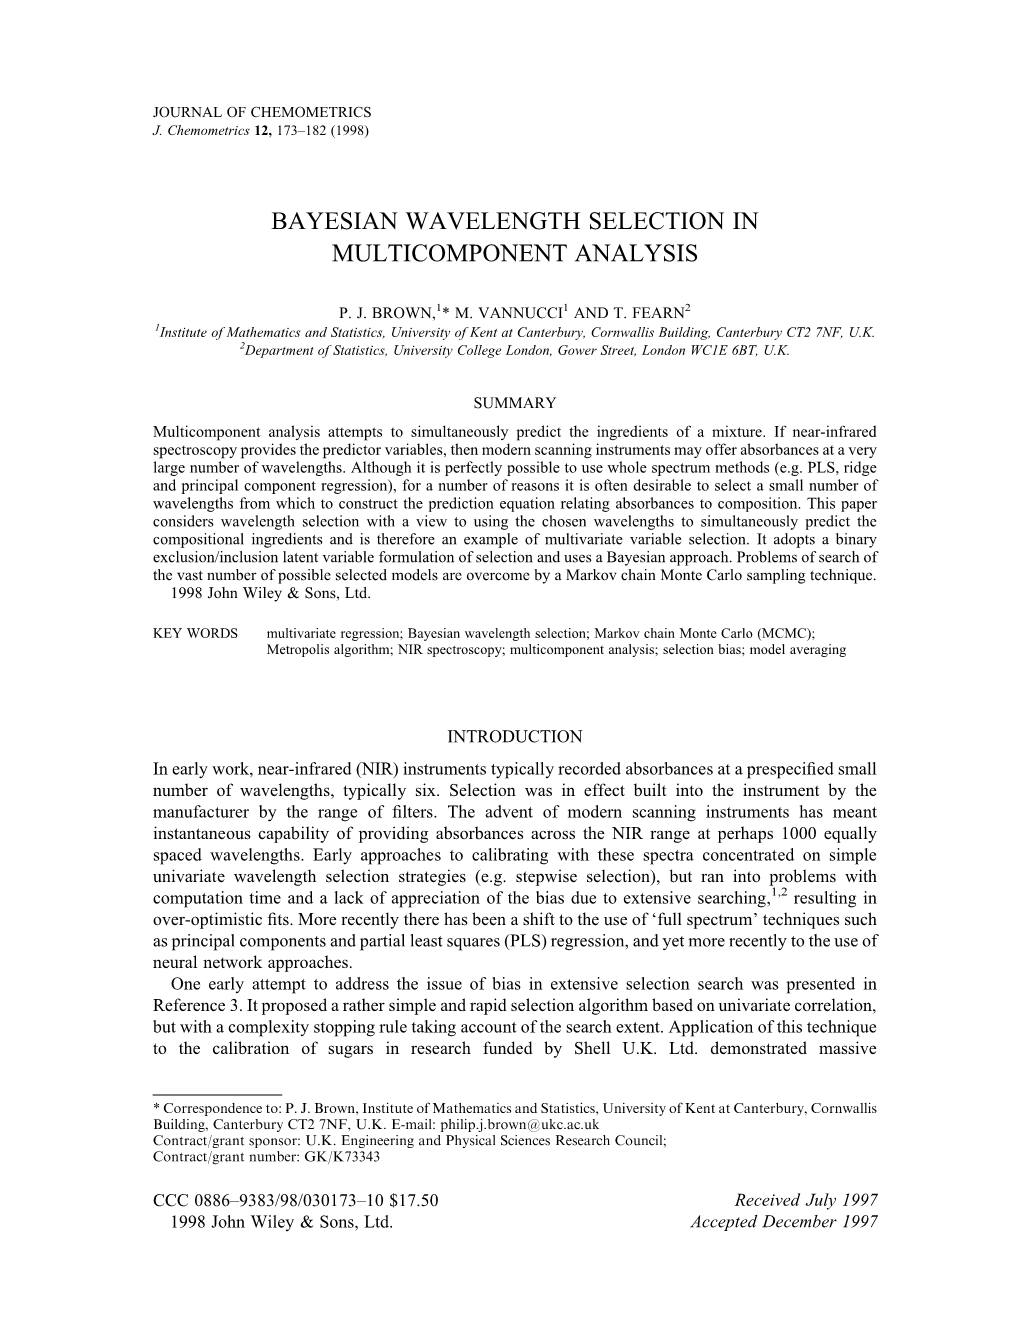 Bayesian Wavelength Selection in Multicomponent Analysis